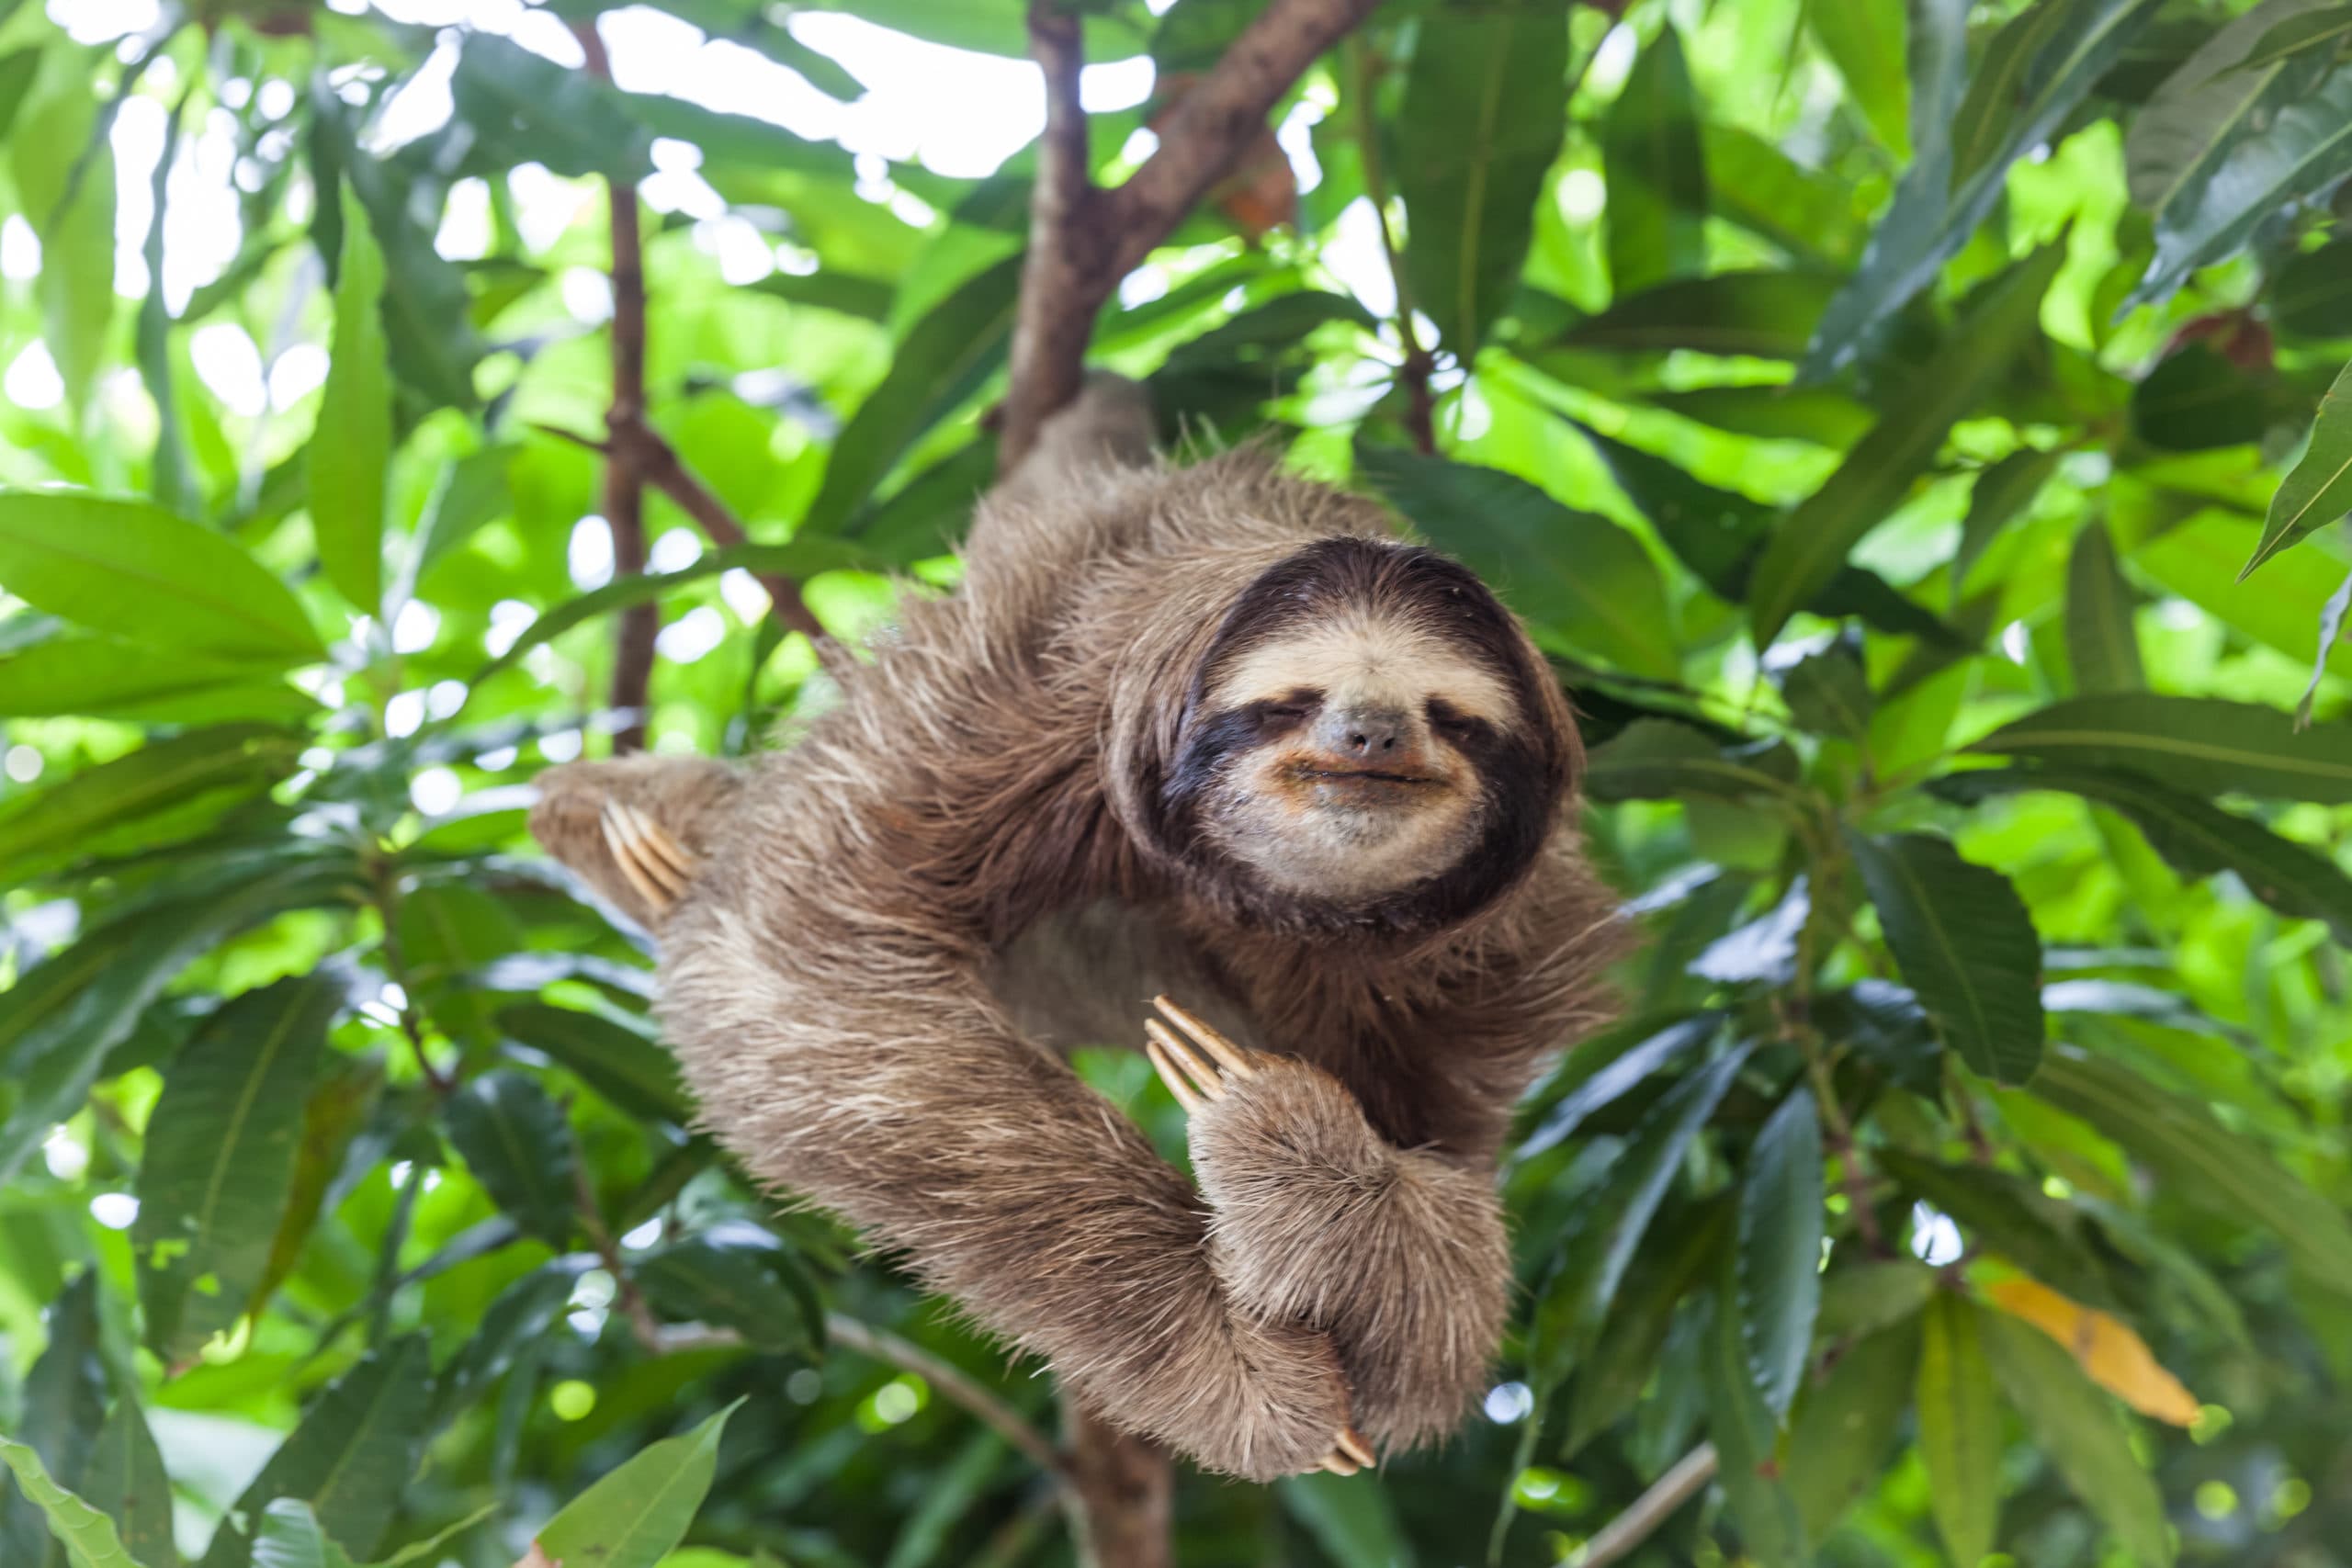 Is It Legal to Own a Pet Sloth In Florida?